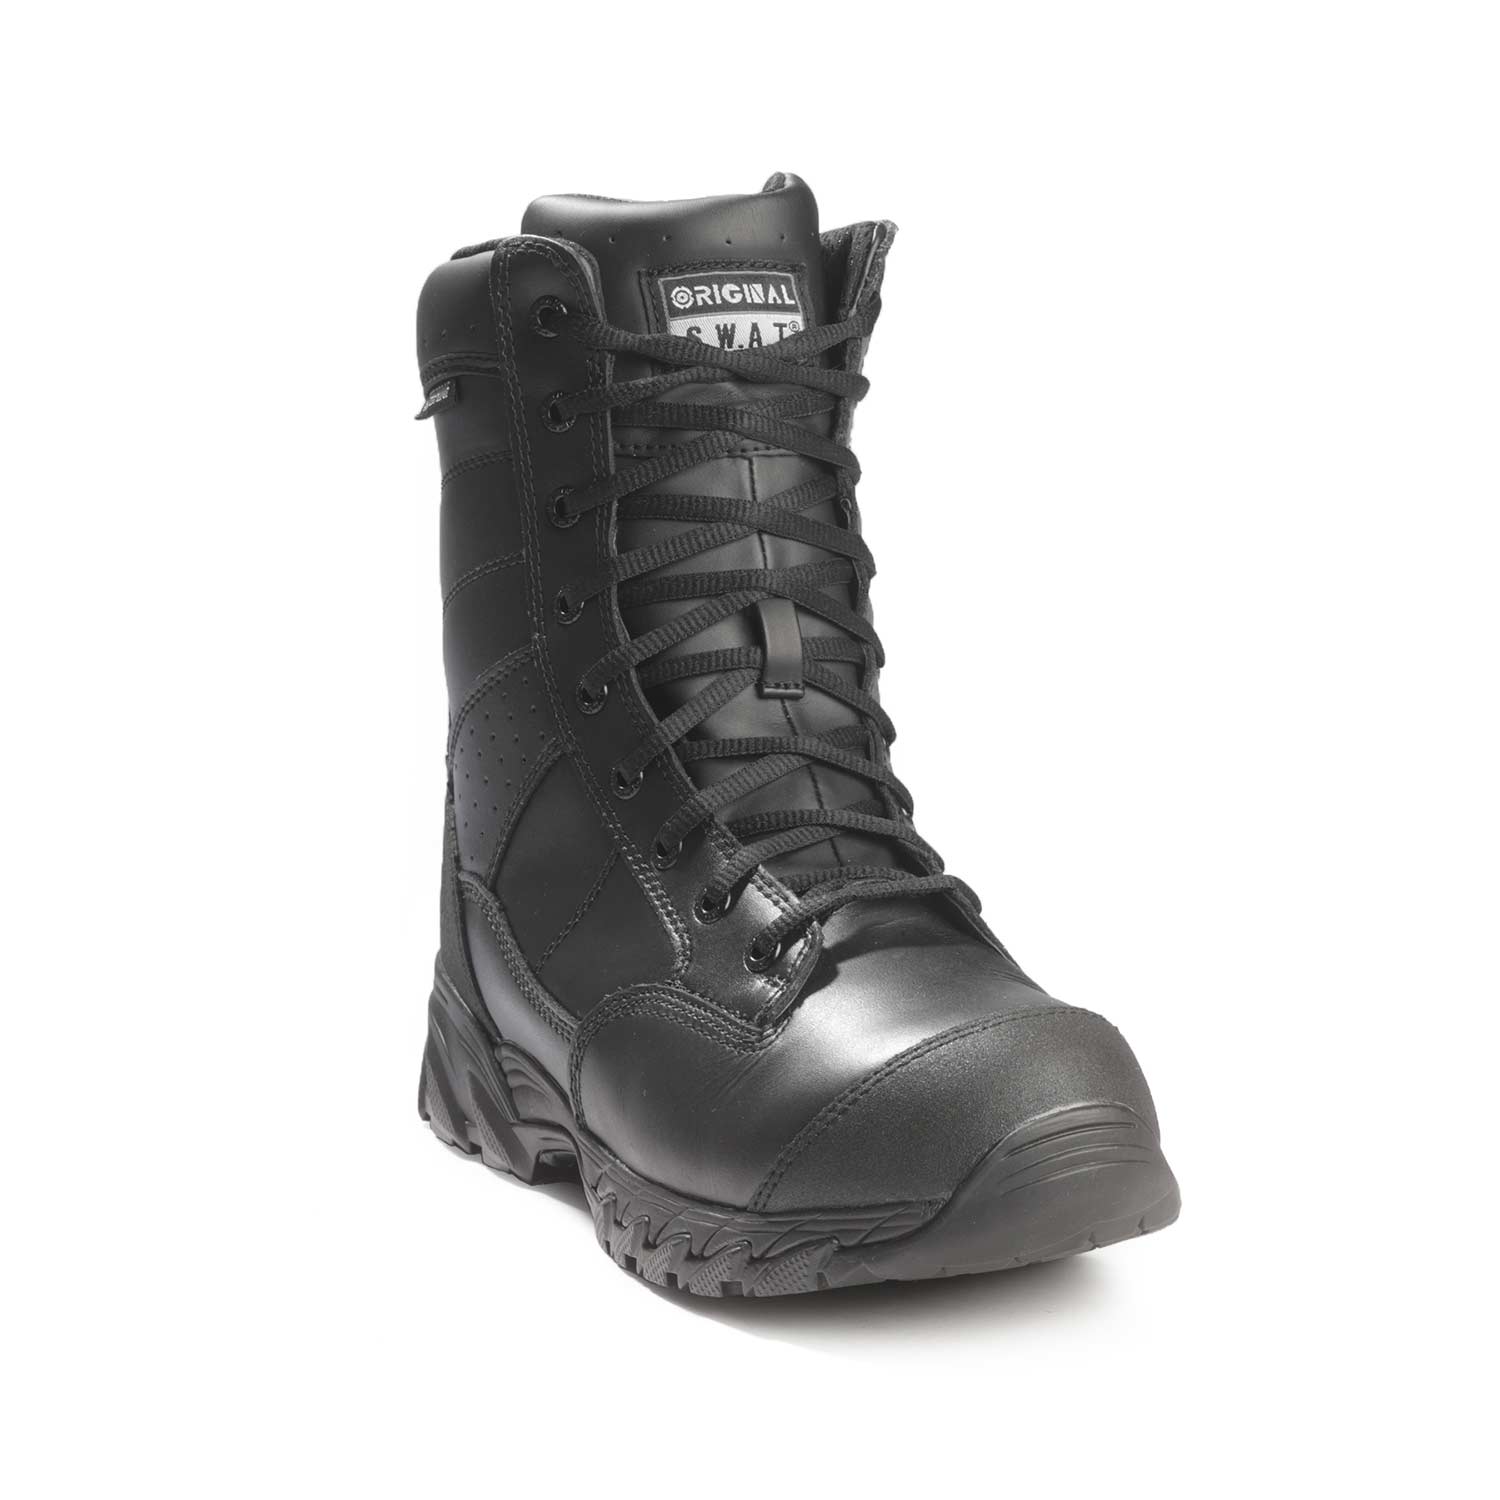 Original S.W.A.T. 9" Chase Tactical Waterproof Boot